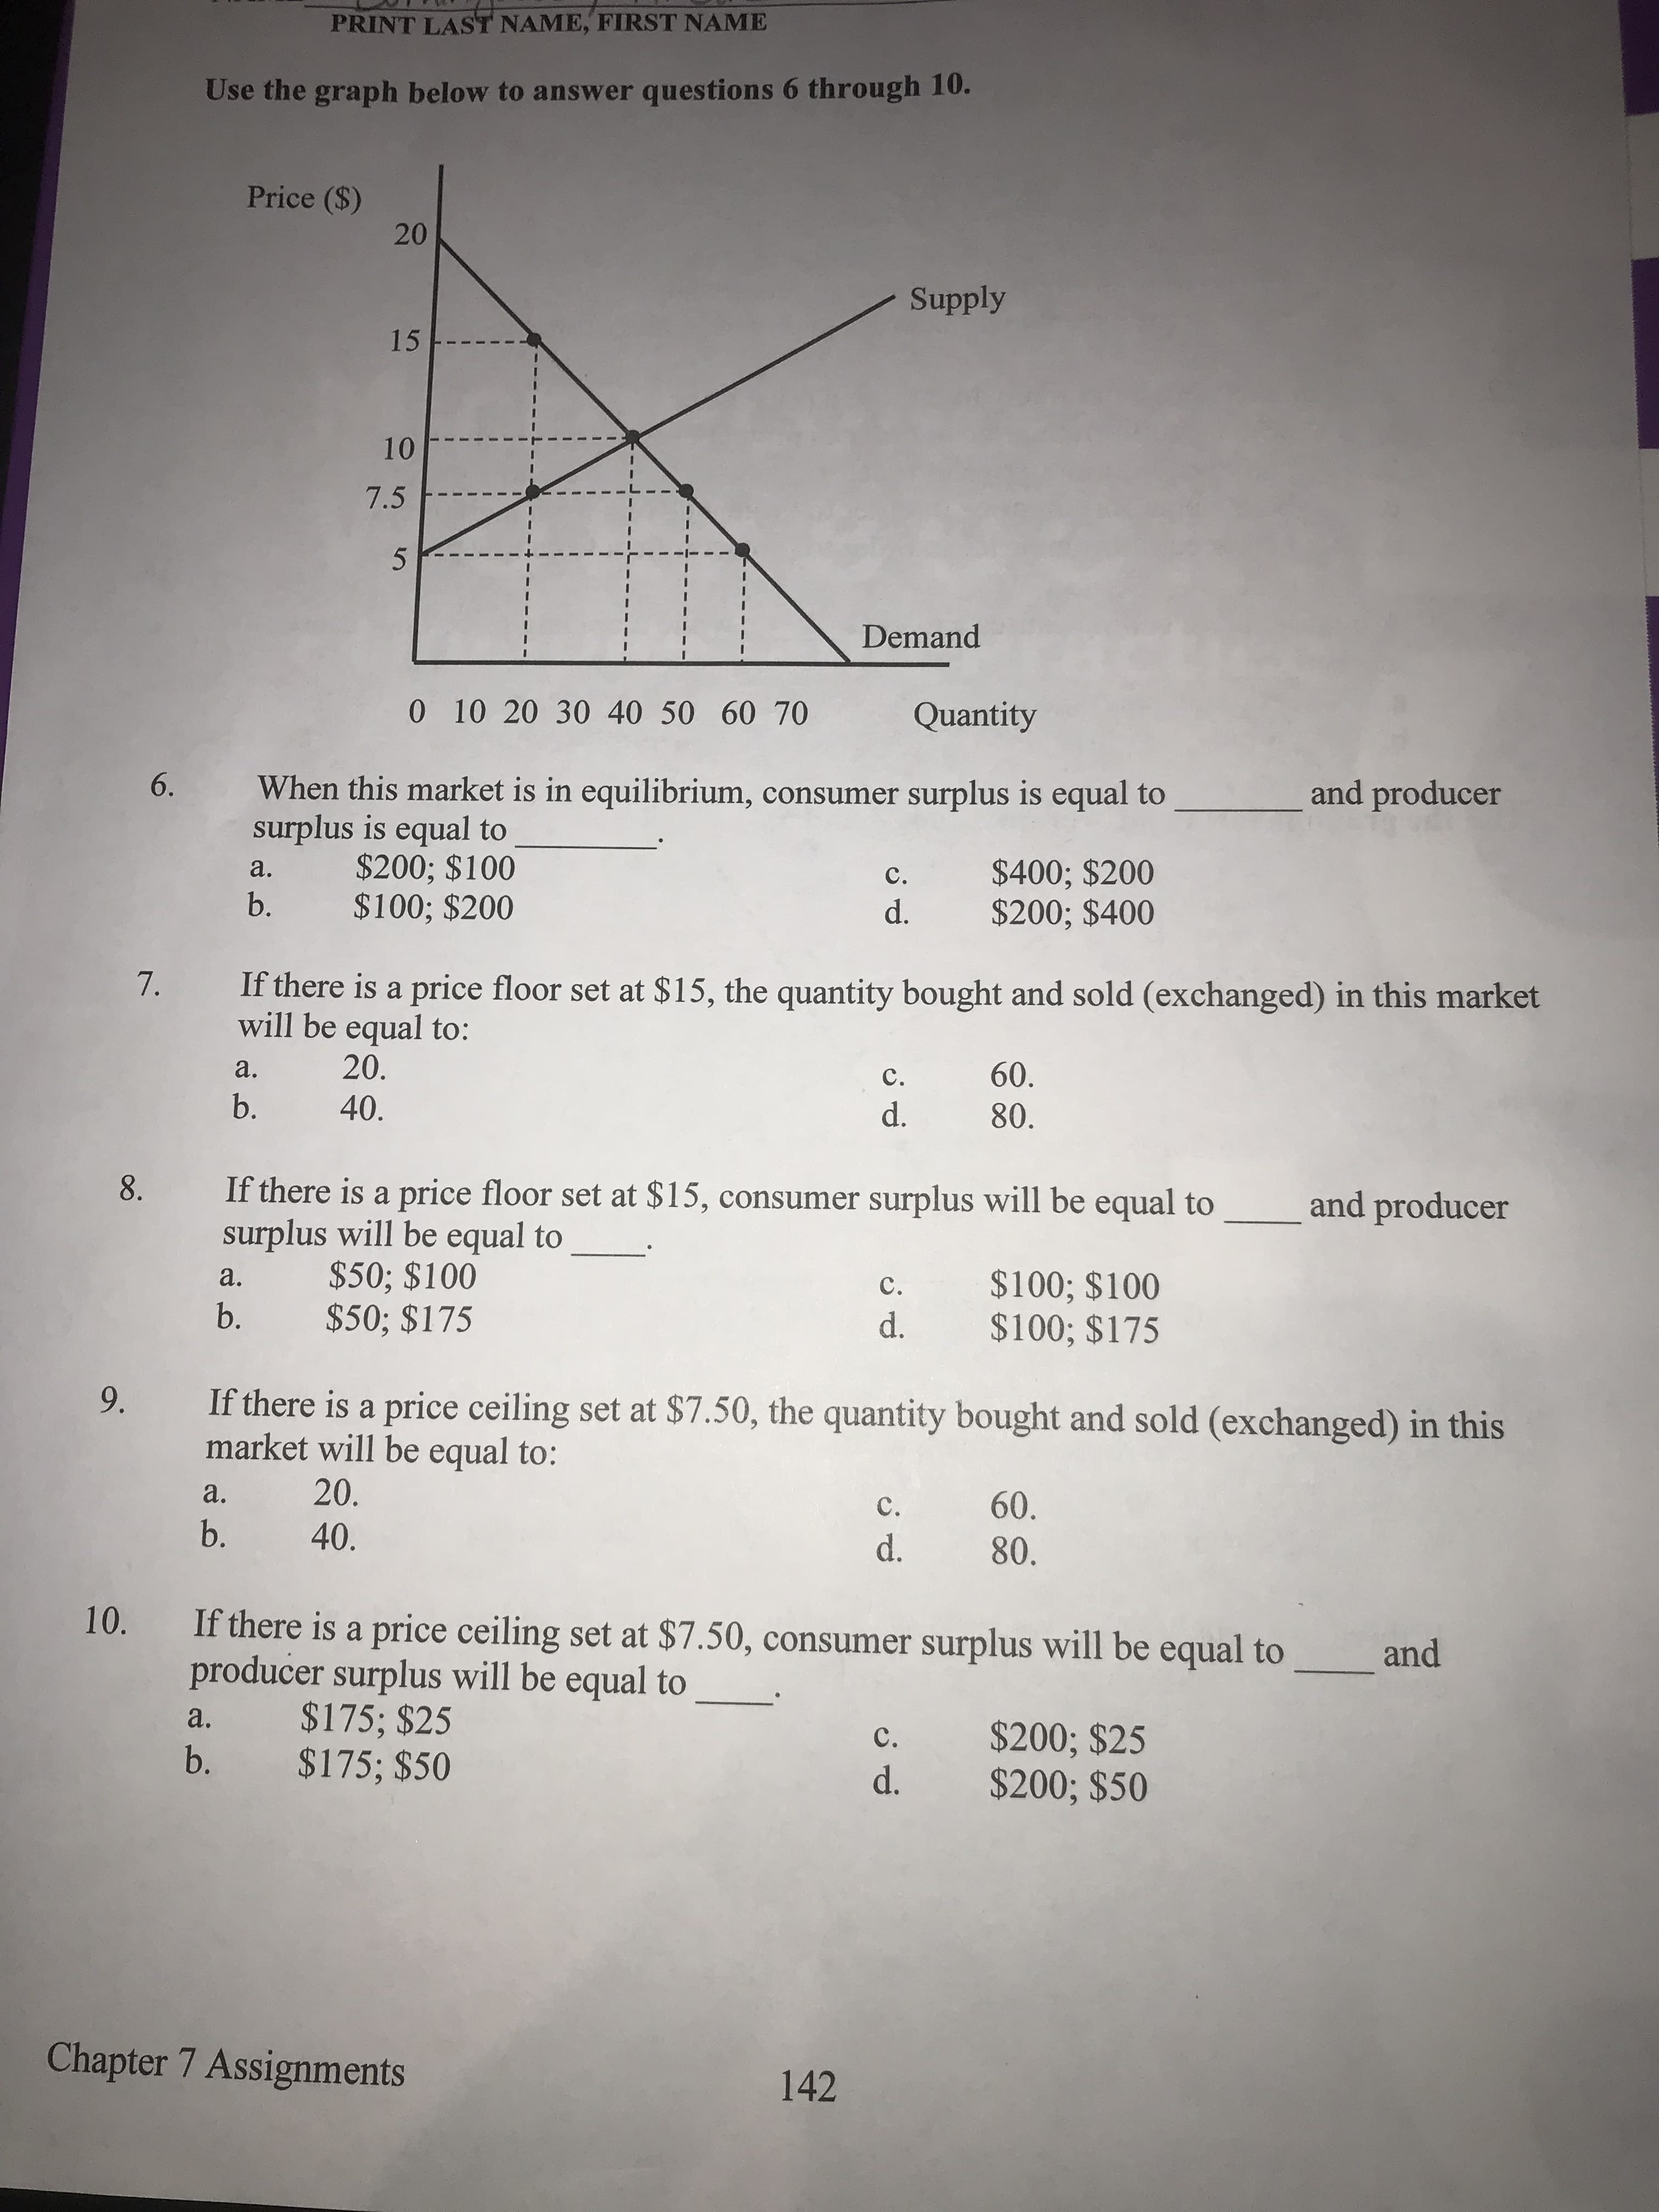 PRINT LAST NAME, FIRST NAME
Use the graph below to answer questions 6 through 10.
Price (S)
Supply
15
10
7.5
5
Demand
0 10 20 30 40 50 60 70
Quantity
When this market is in equilibrium, consumer surplus is equal to
surplus is equal
6.
and producer
$200; $100
$400; $200
$200; $400
а.
с.
b. $100; $200
d.
If there is a price floor set at $15, the quantity bought and sold (exchanged) in this market
will be equal to:
7.
20.
а.
60.
с.
b.
40.
80
d.
If there is a price floor set at $15, consumer surplus will be equal to
8.
and producer
surplus will be equal to
$50; $100
$50; $175
а.
$100; $100
$100; $175
с.
b.
d.
If there is a price ceiling set at $7.50, the quantity bought and sold (exchanged) in this
market will be equal to:
9.
20.
а.
60.
с.
b.
40.
d.
80.
10.
If there is a price ceiling set at $7.50, consumer surplus will be equal to
producer surplus will be equal to
$175; $25
$175; $50
and
а.
$200; $25
$200; $50
с.
b.
d.
Chapter 7 Assignments
142
20
